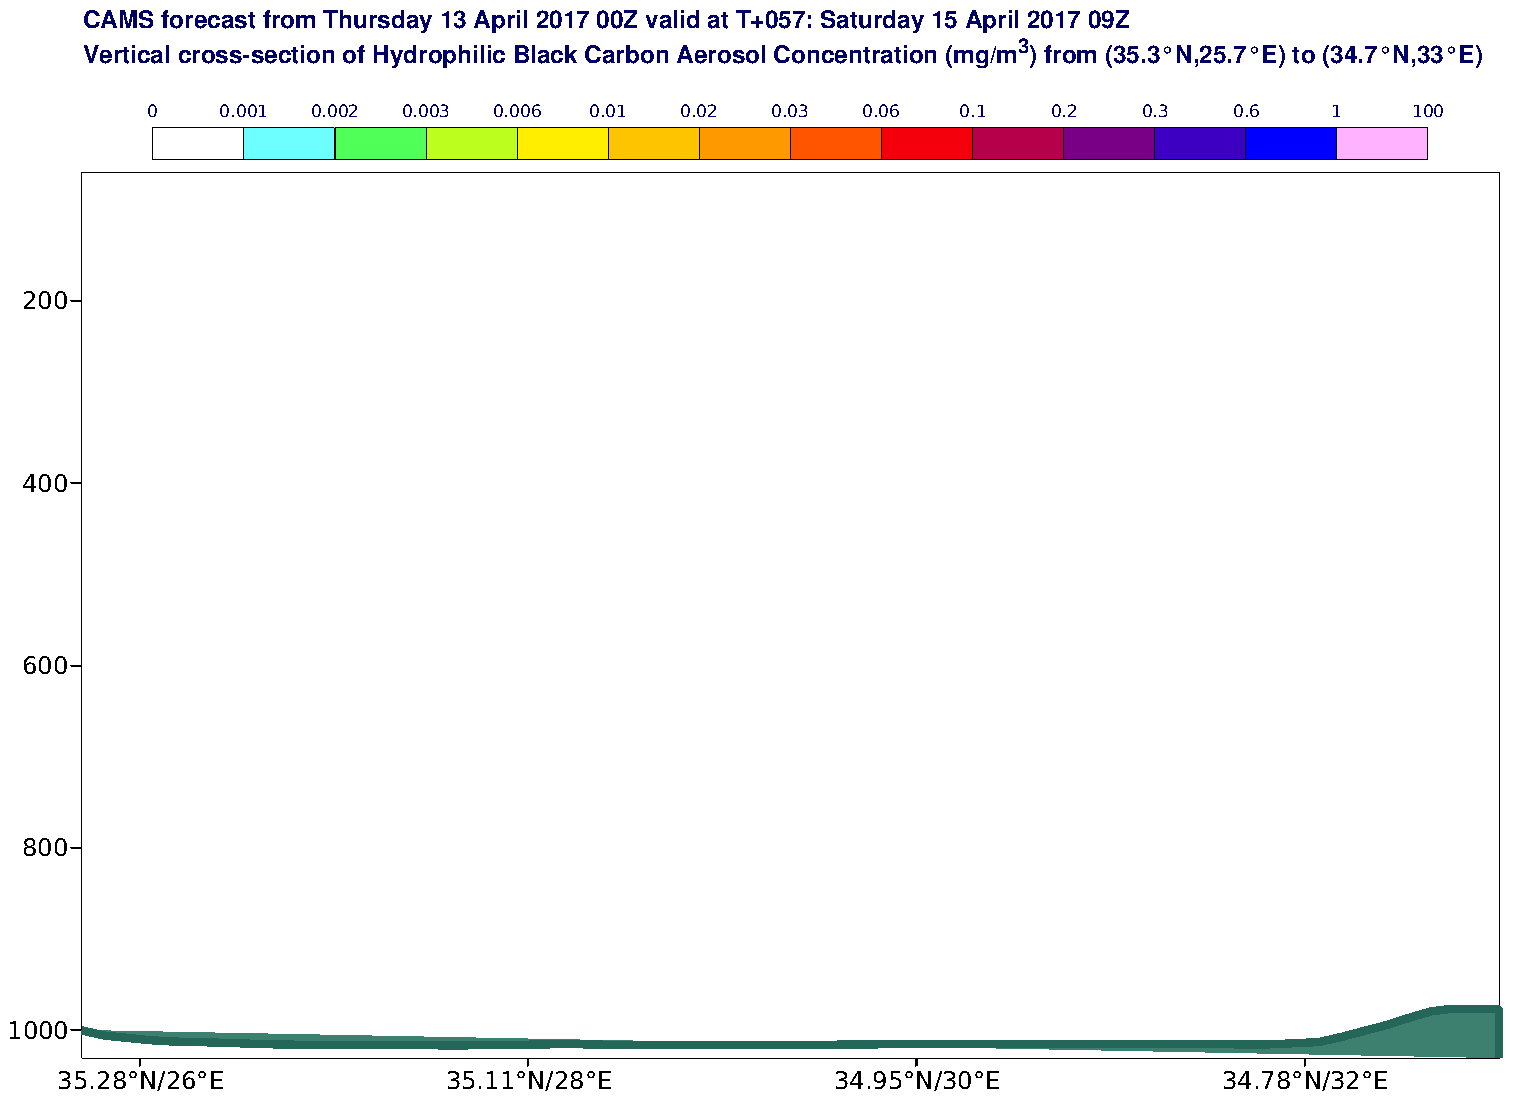 Vertical cross-section of Hydrophilic Black Carbon Aerosol Concentration (mg/m3) valid at T57 - 2017-04-15 09:00